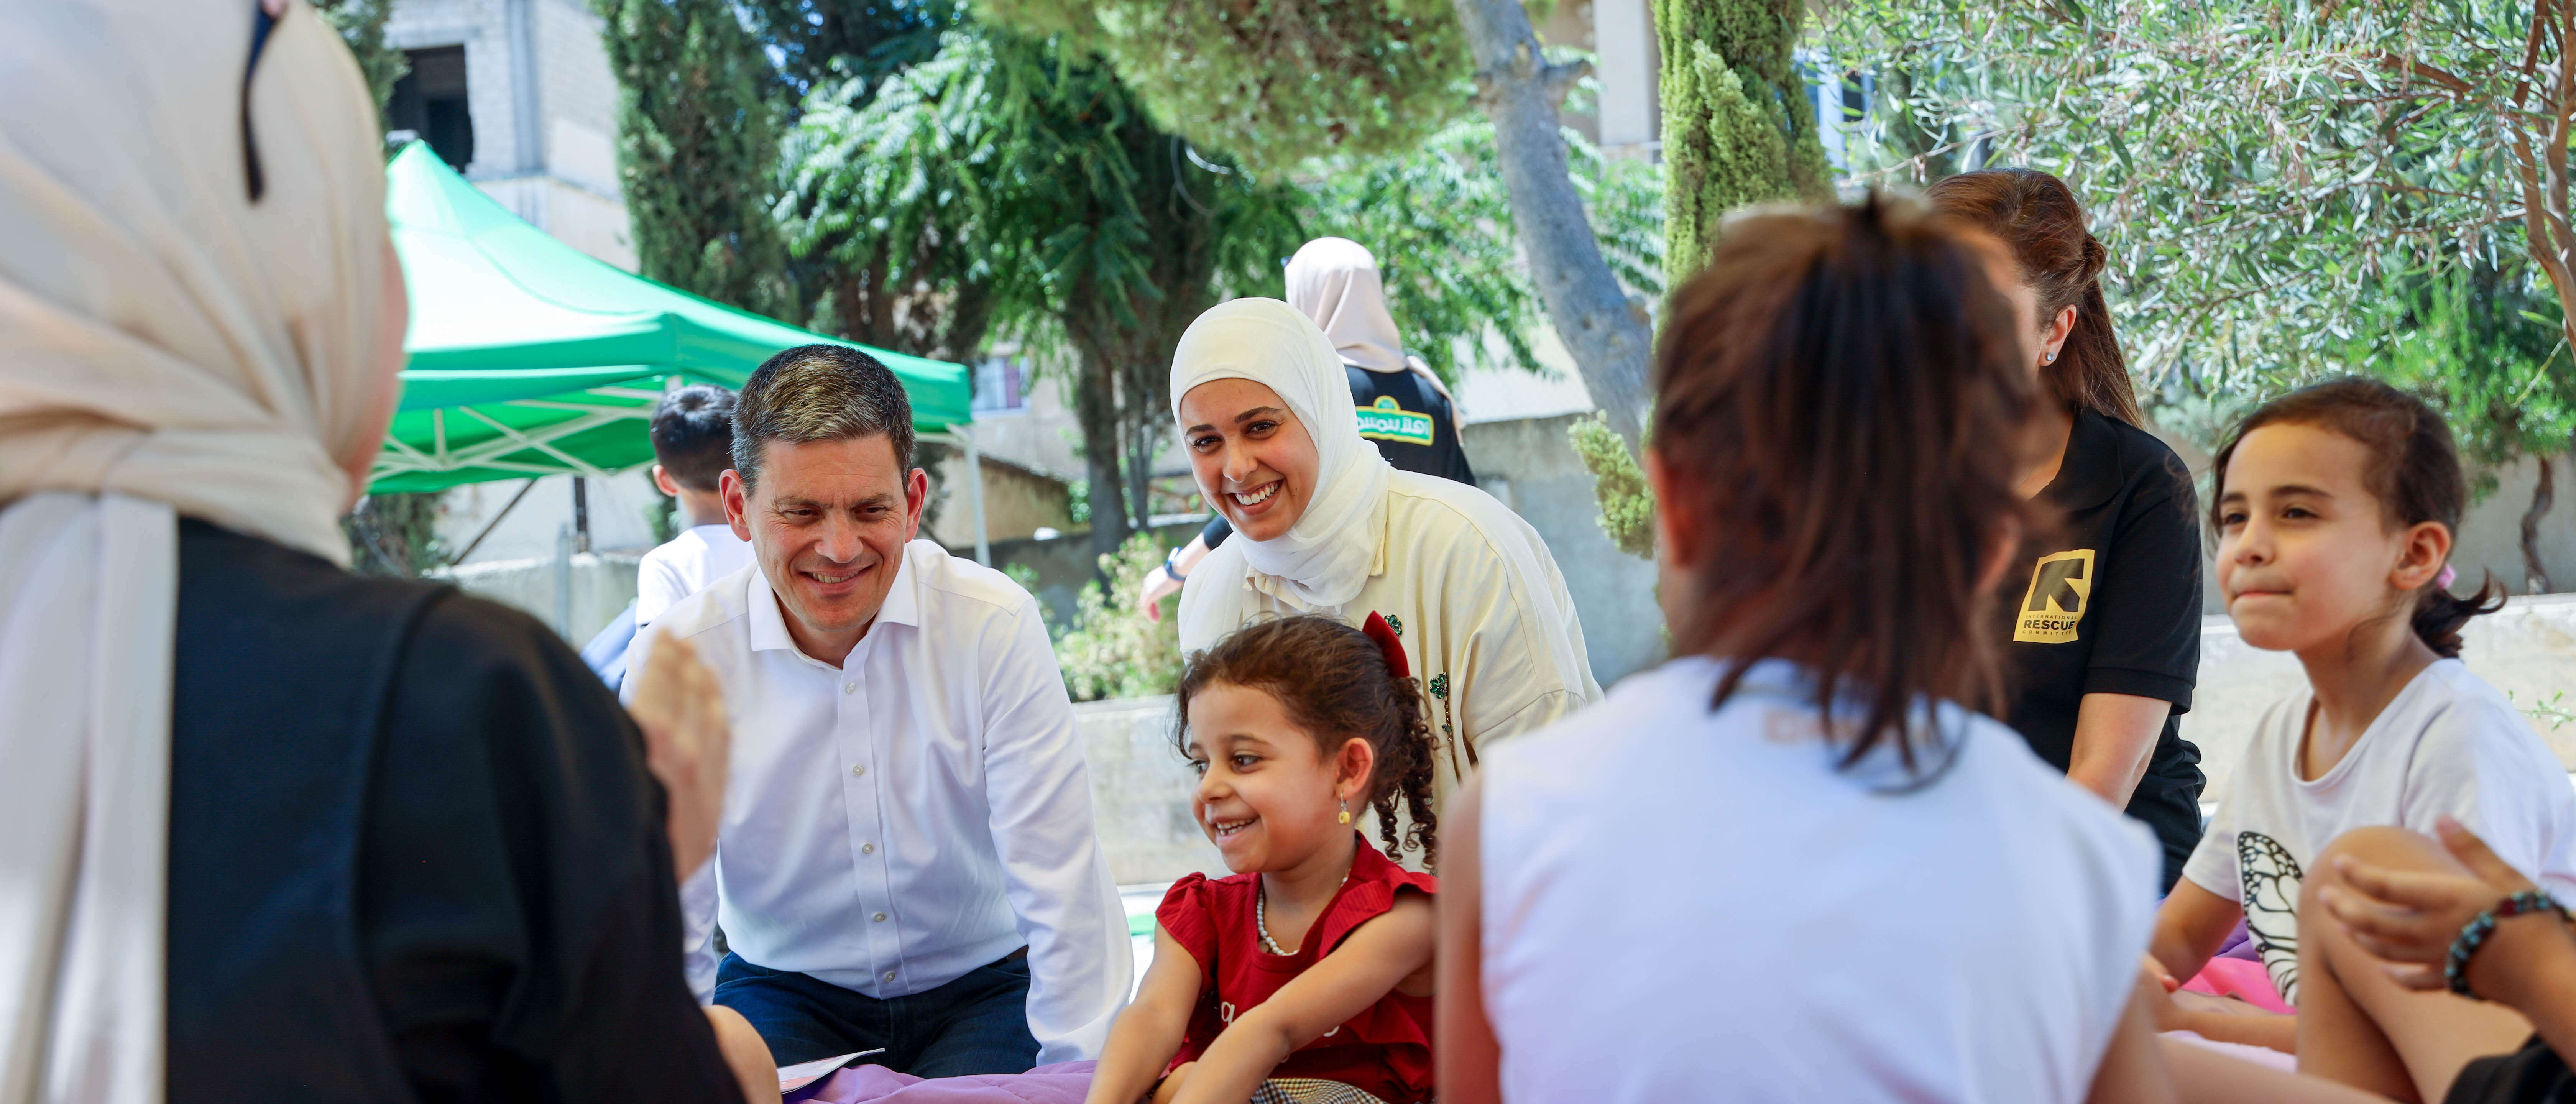 David Miliband meets with clients in Jordan